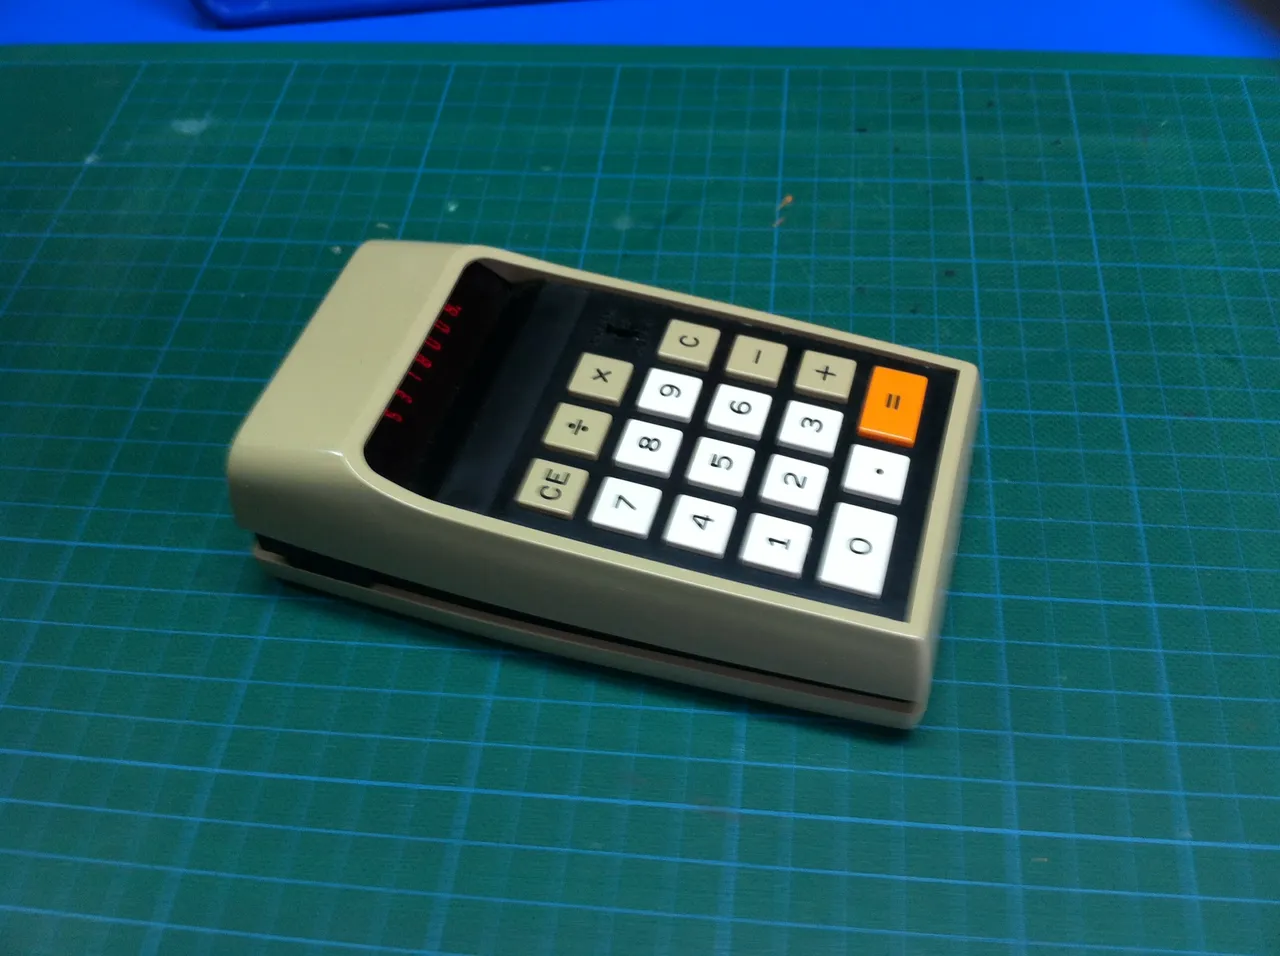 Texas Instruments Datamath 2500 calculator nameplate by Brad Grier